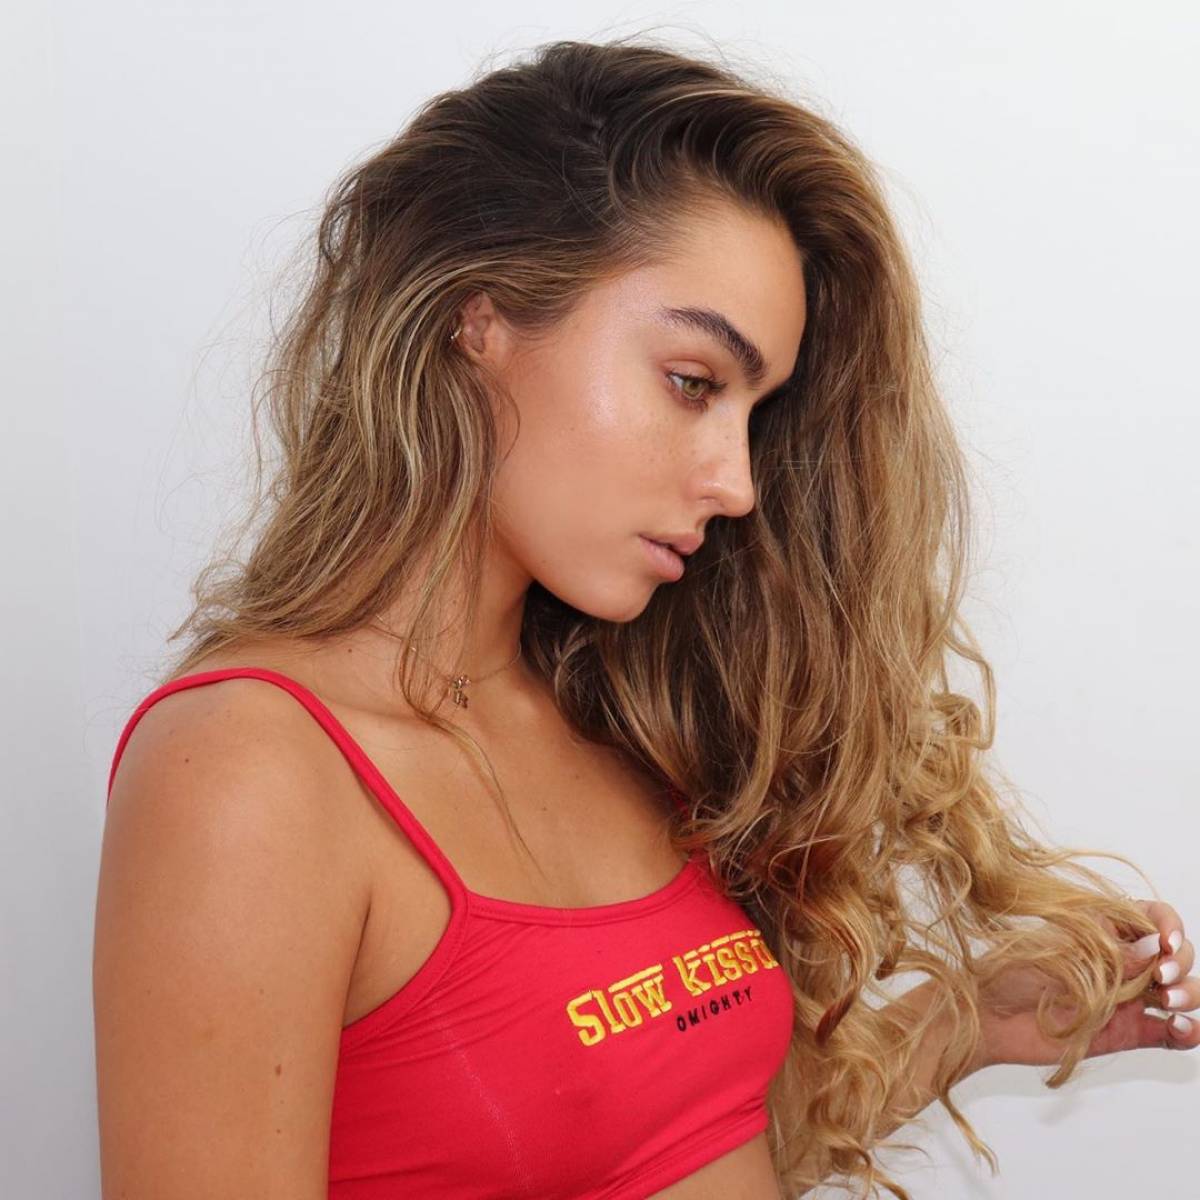 Sommer Ray â€“ Instagram photos (sommerray) 1 luvcelebs